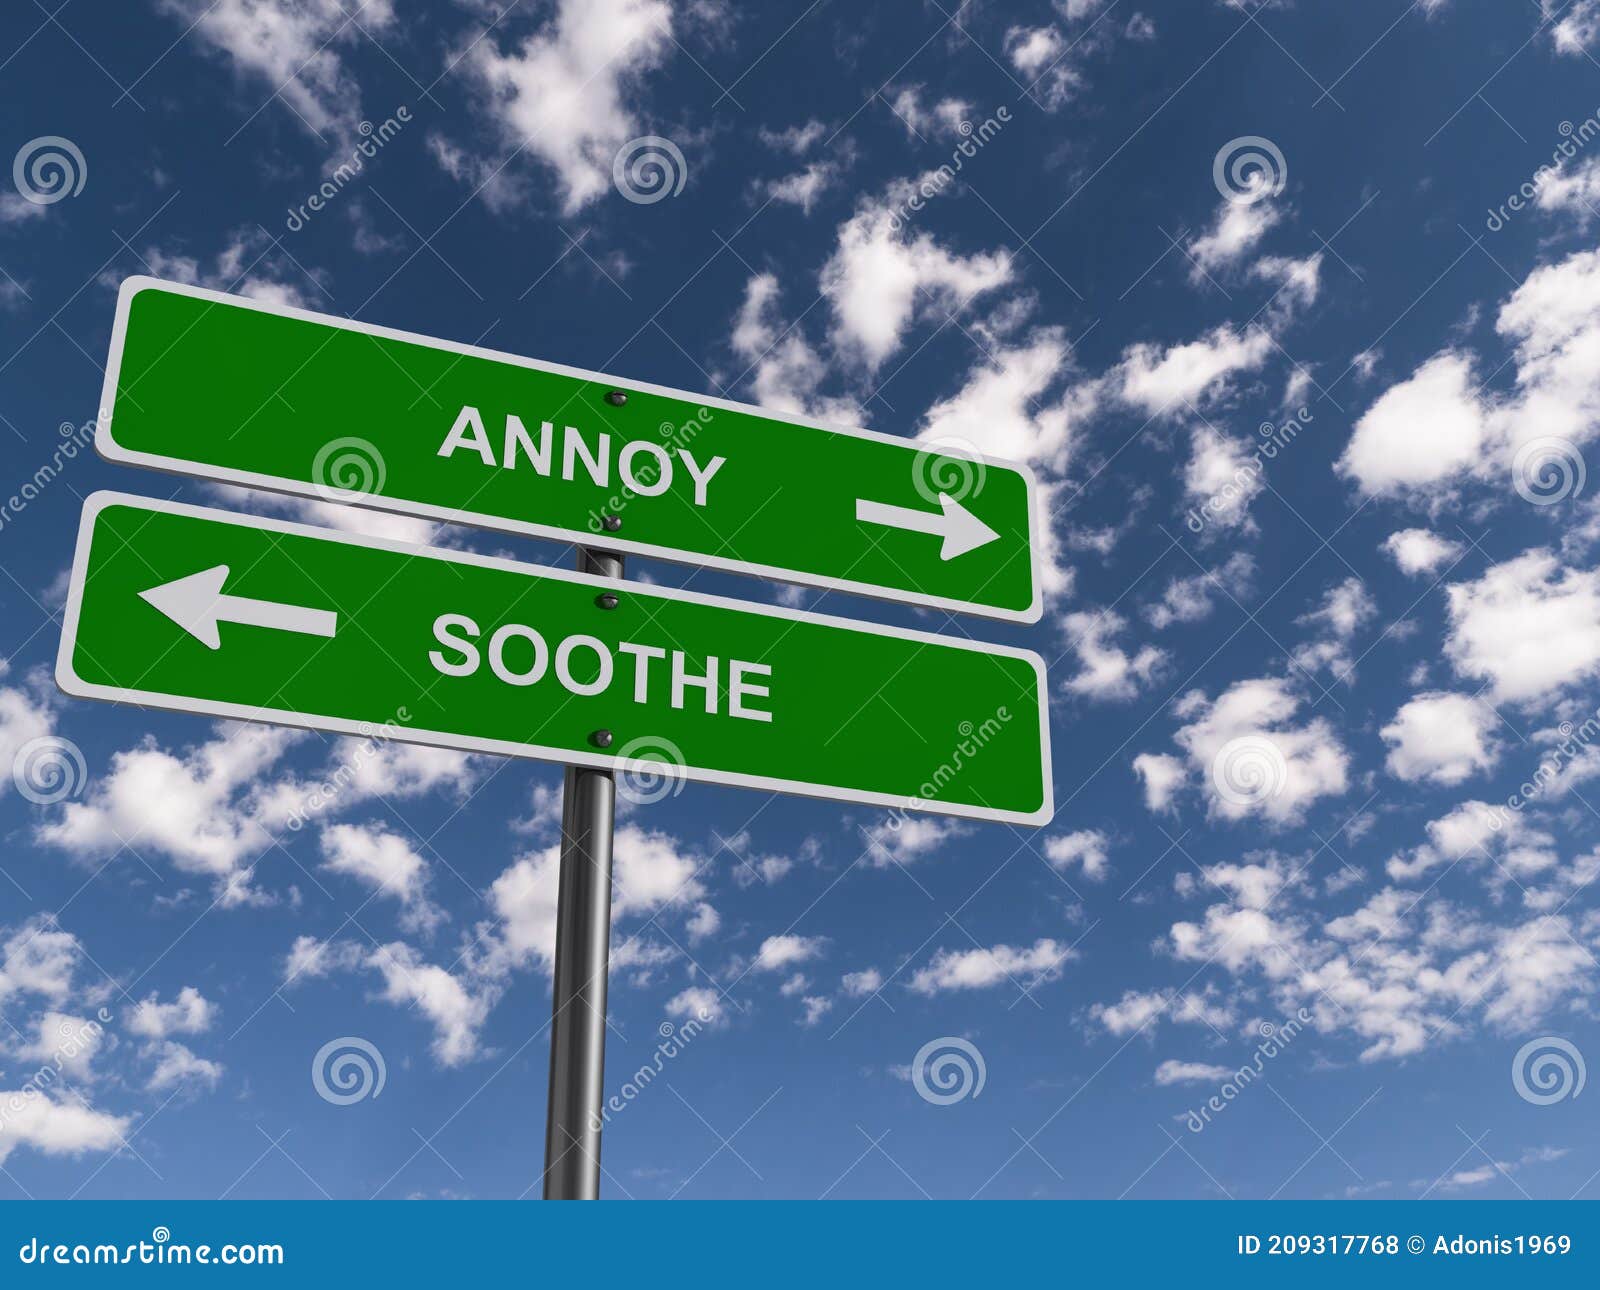 annoy soothe traffic sign